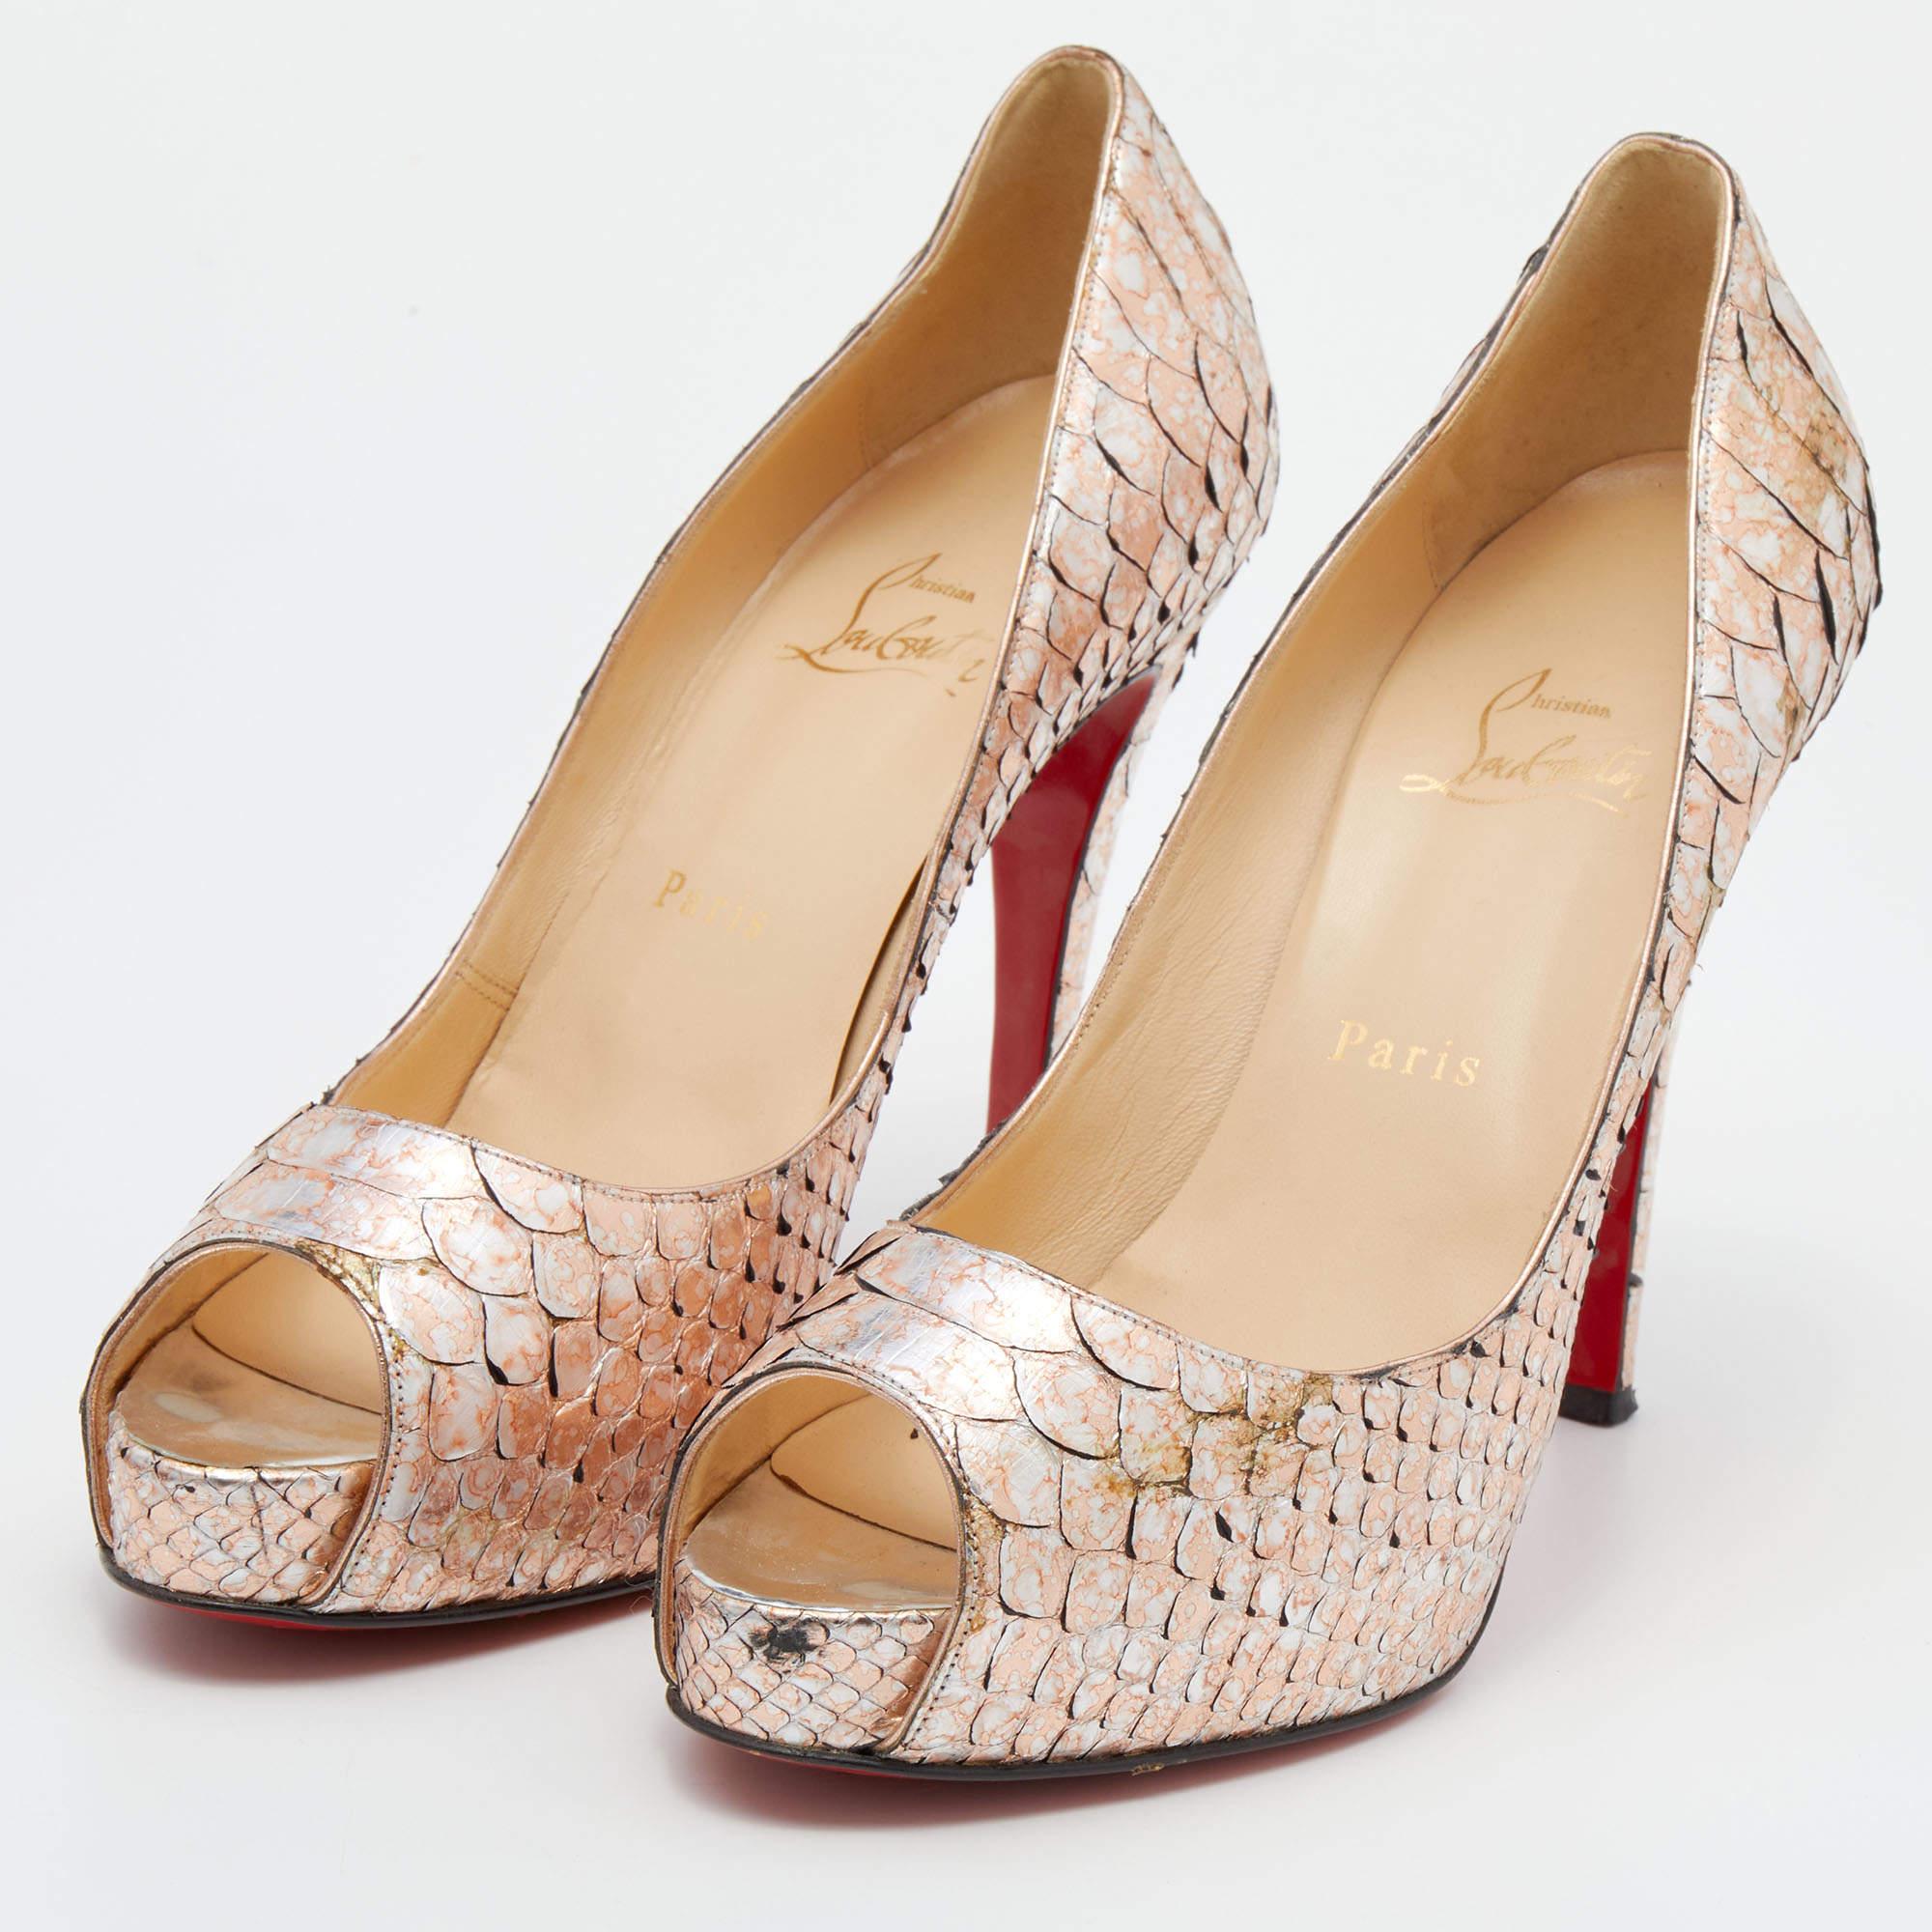 The architectural silhouette and precise cuts of this pair of pumps from Christian Louboutin exemplify the brand's mastery in the art of stiletto making. Finely created from python leather, it is detailed with 11.5cm heels and platforms. The